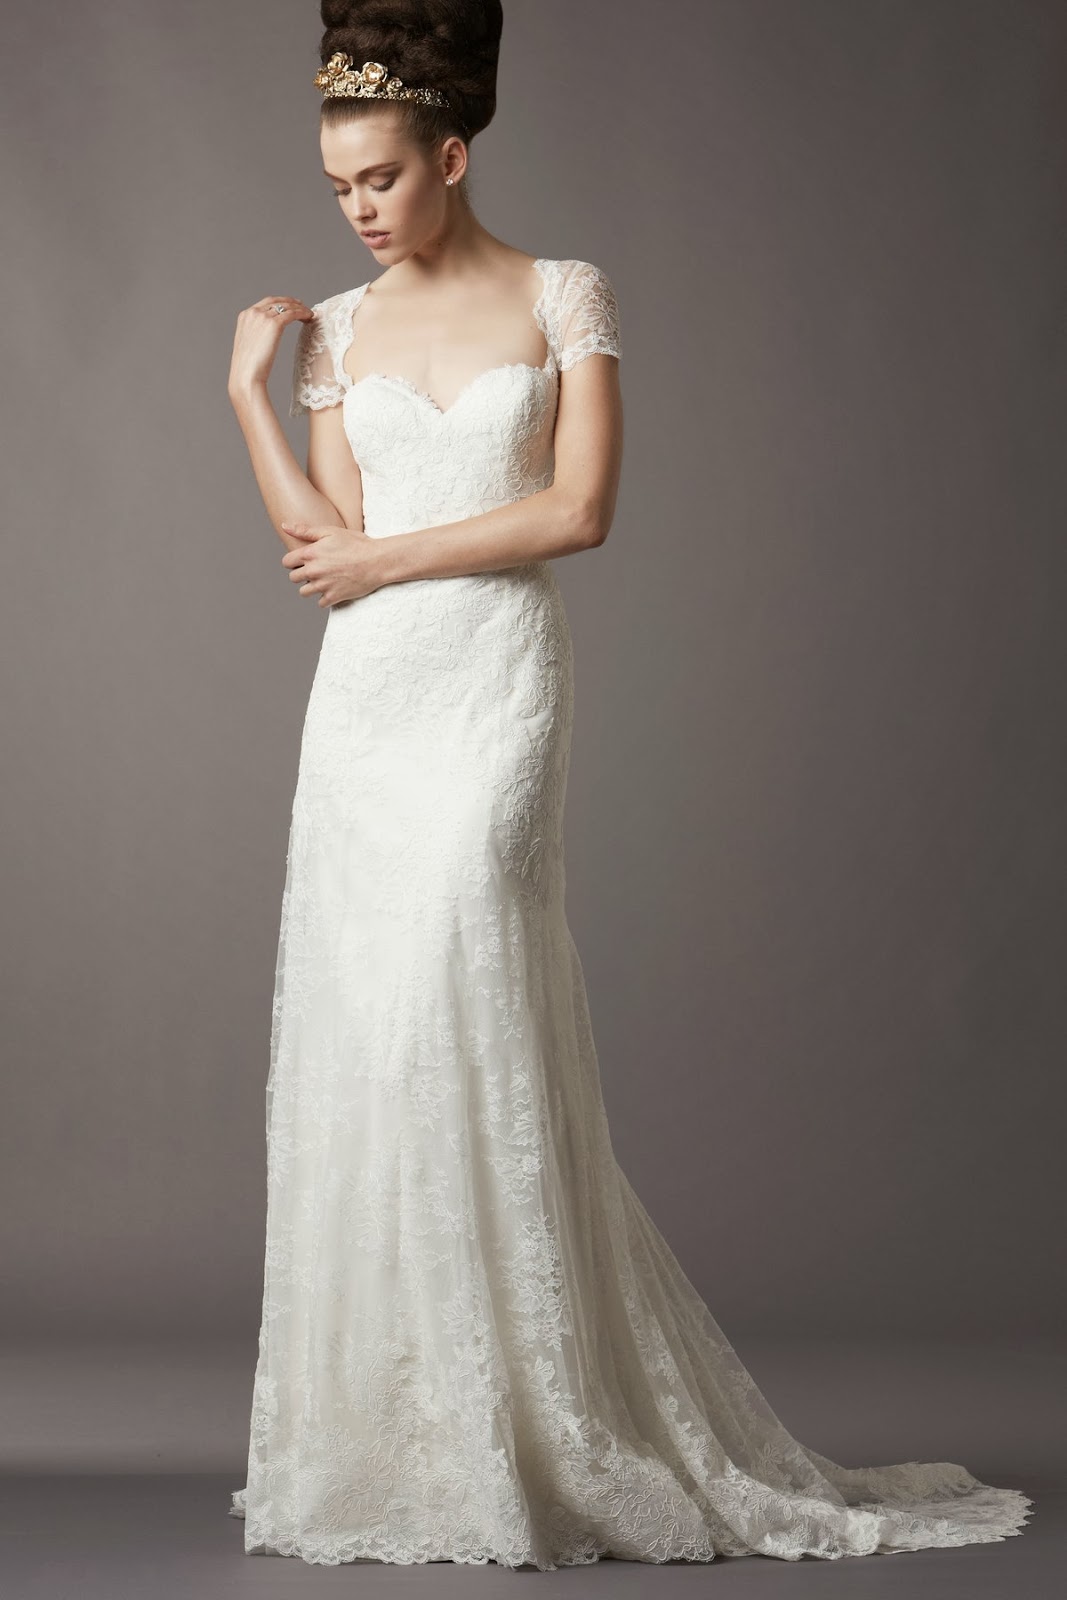 Link Camp Wedding Dress Collection 2013 (22) Expensive